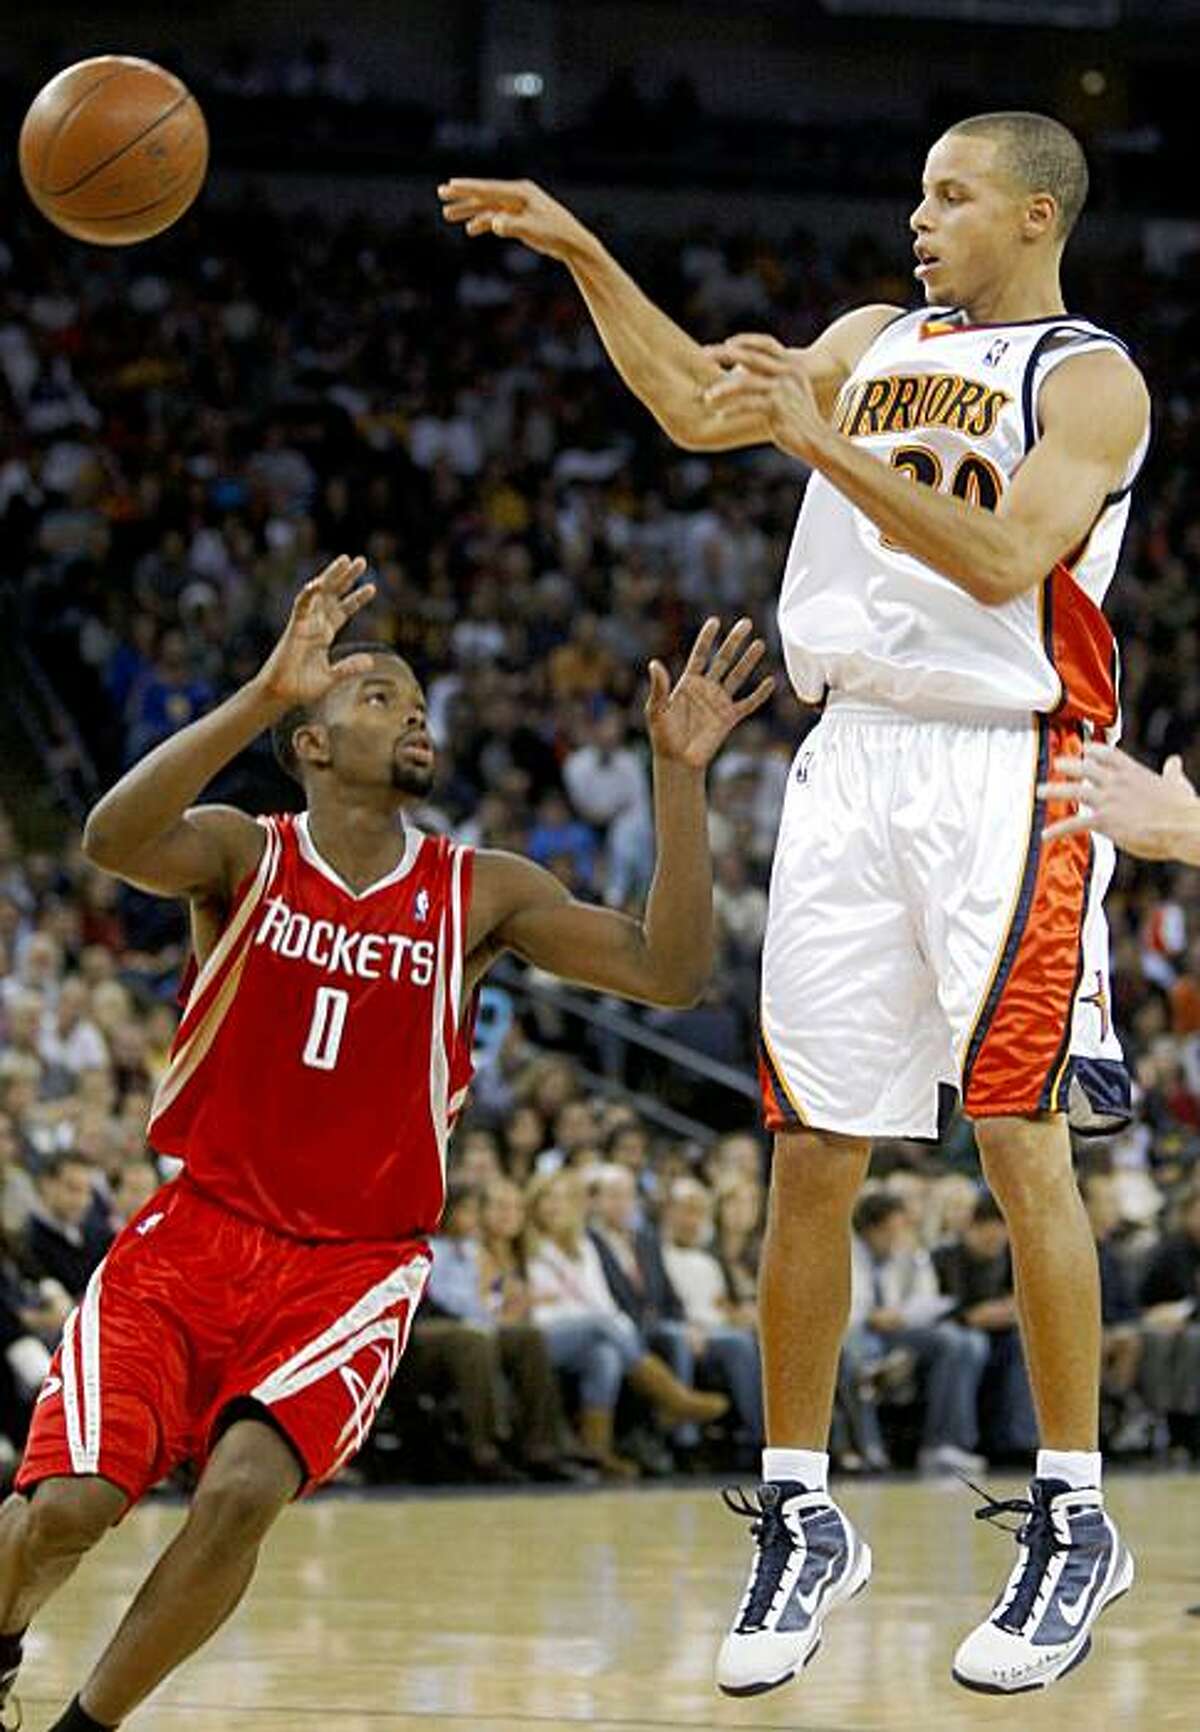 Golden State Warriors' Stephen Curry, right, passes away from Houston Rockets' Aaron Brooks during the second half of an NBA basketball game Wednesday, Oct. 28, 2009, in Oakland, Calif. (AP Photo/Ben Margot)